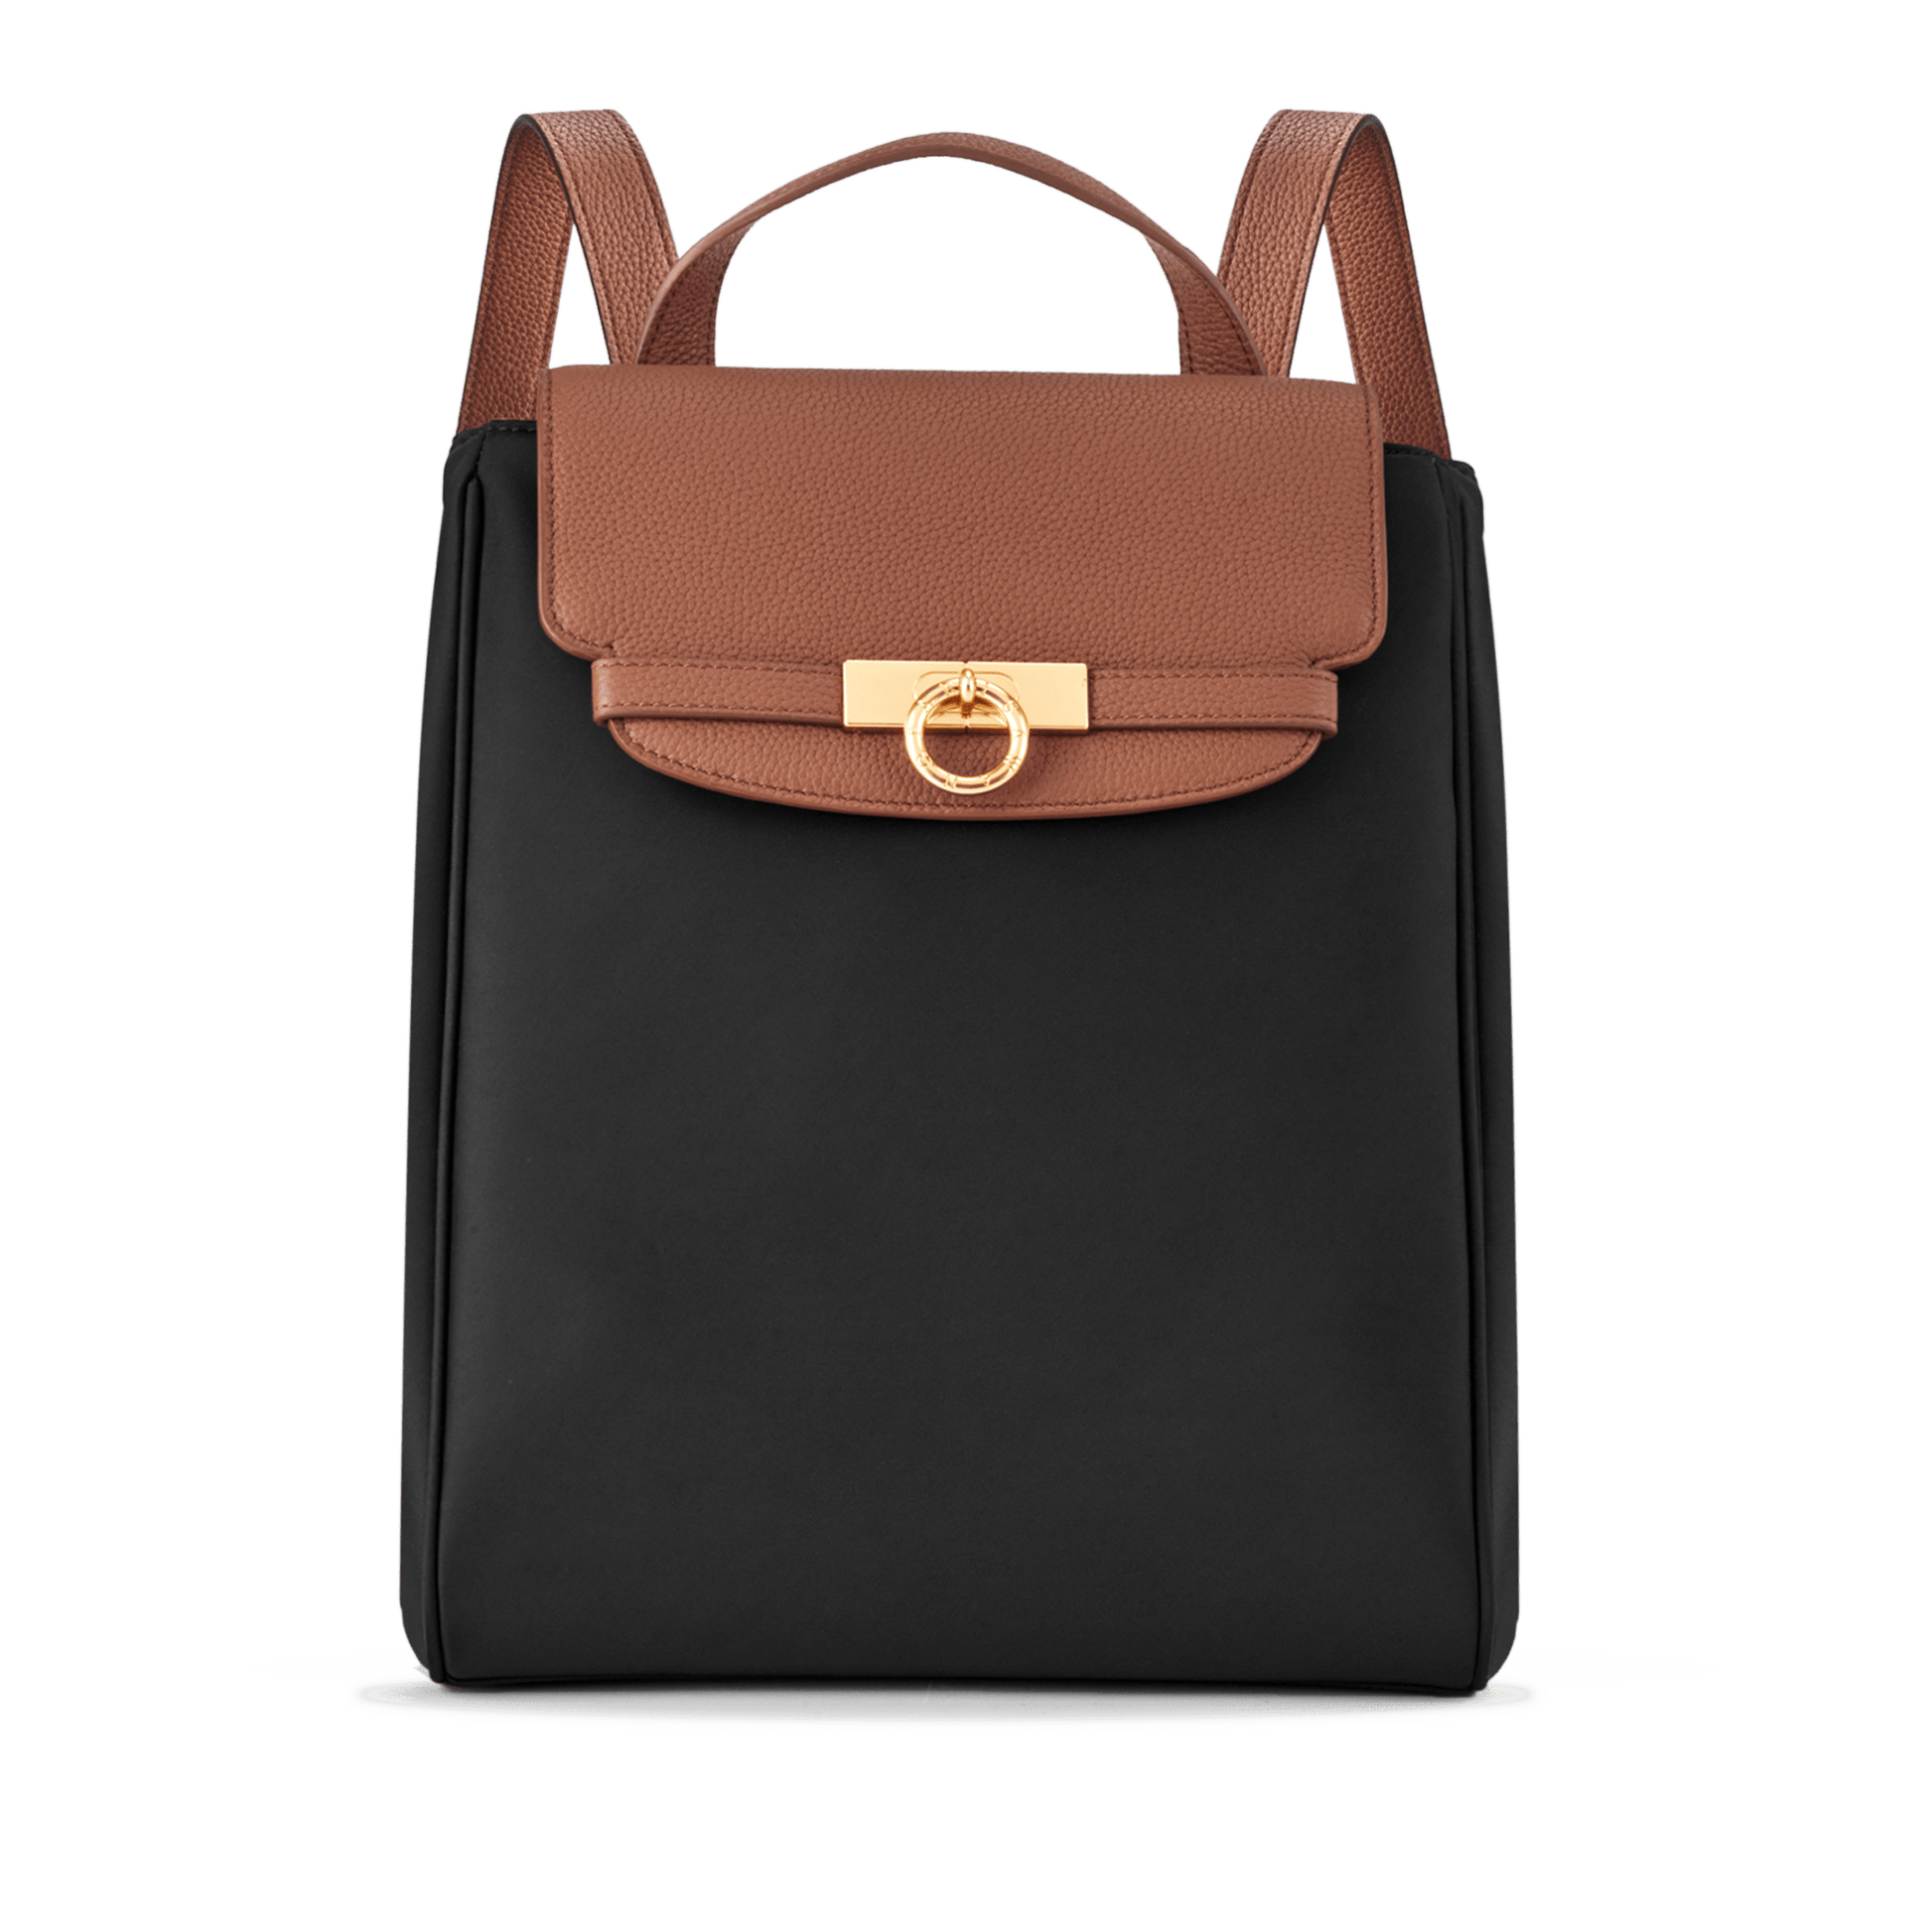 Longchamp Tote Bags and Backpacks Are Up to 60% Off at This Secret Sale